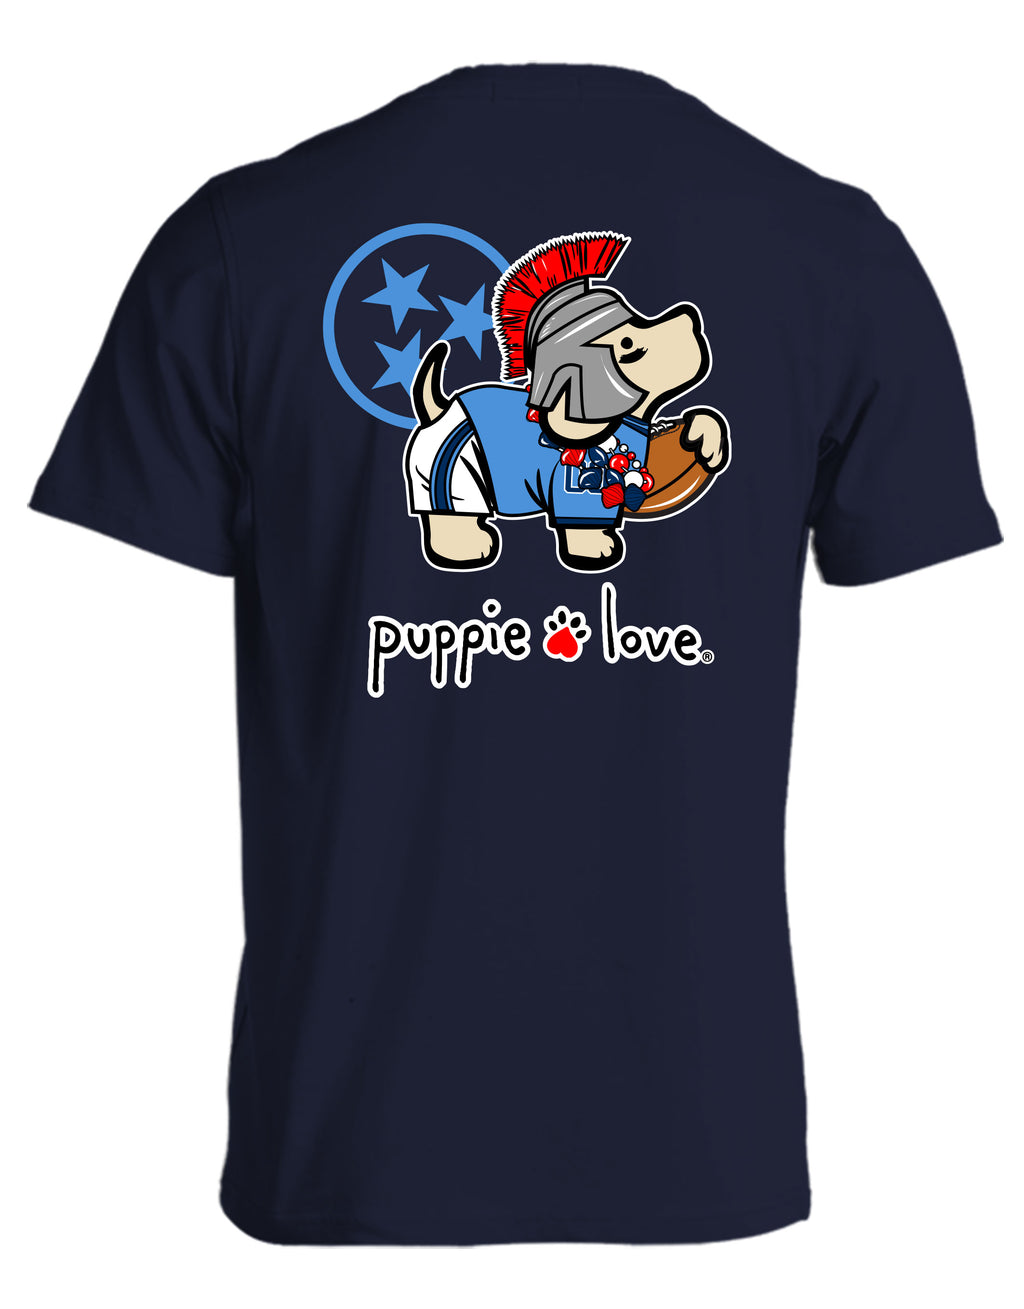 NAVY AND RED MASCOT PUP - Puppie Love